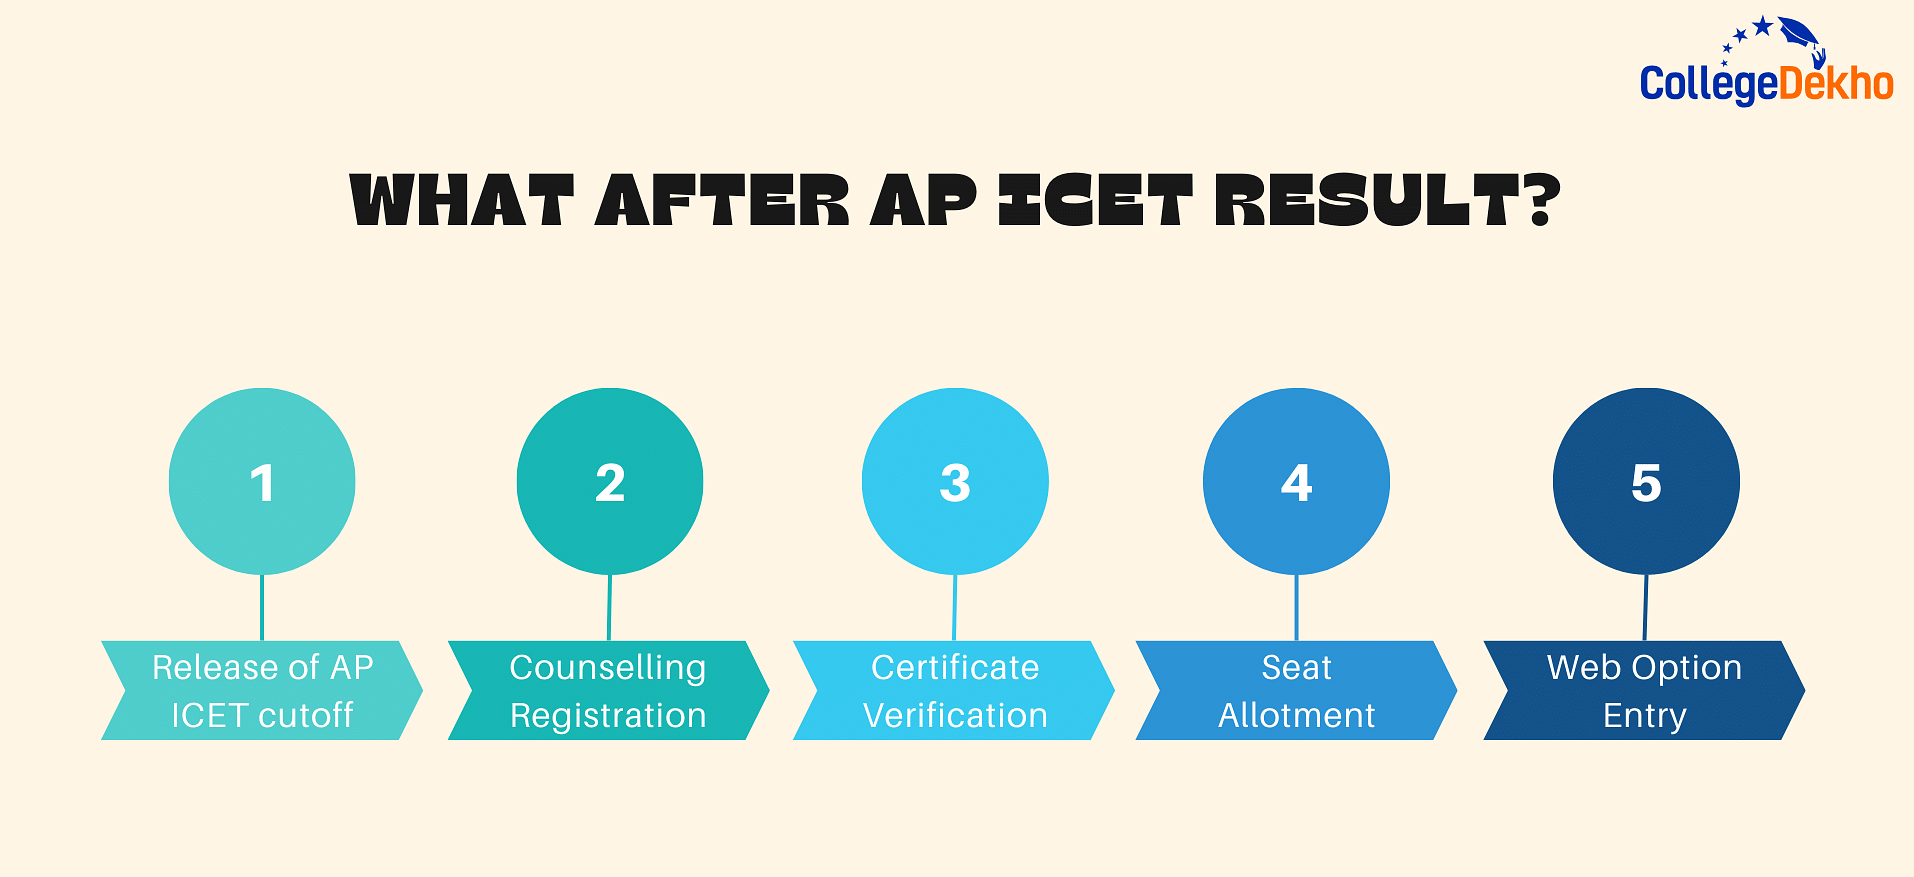 WHat After AP ICET Result?